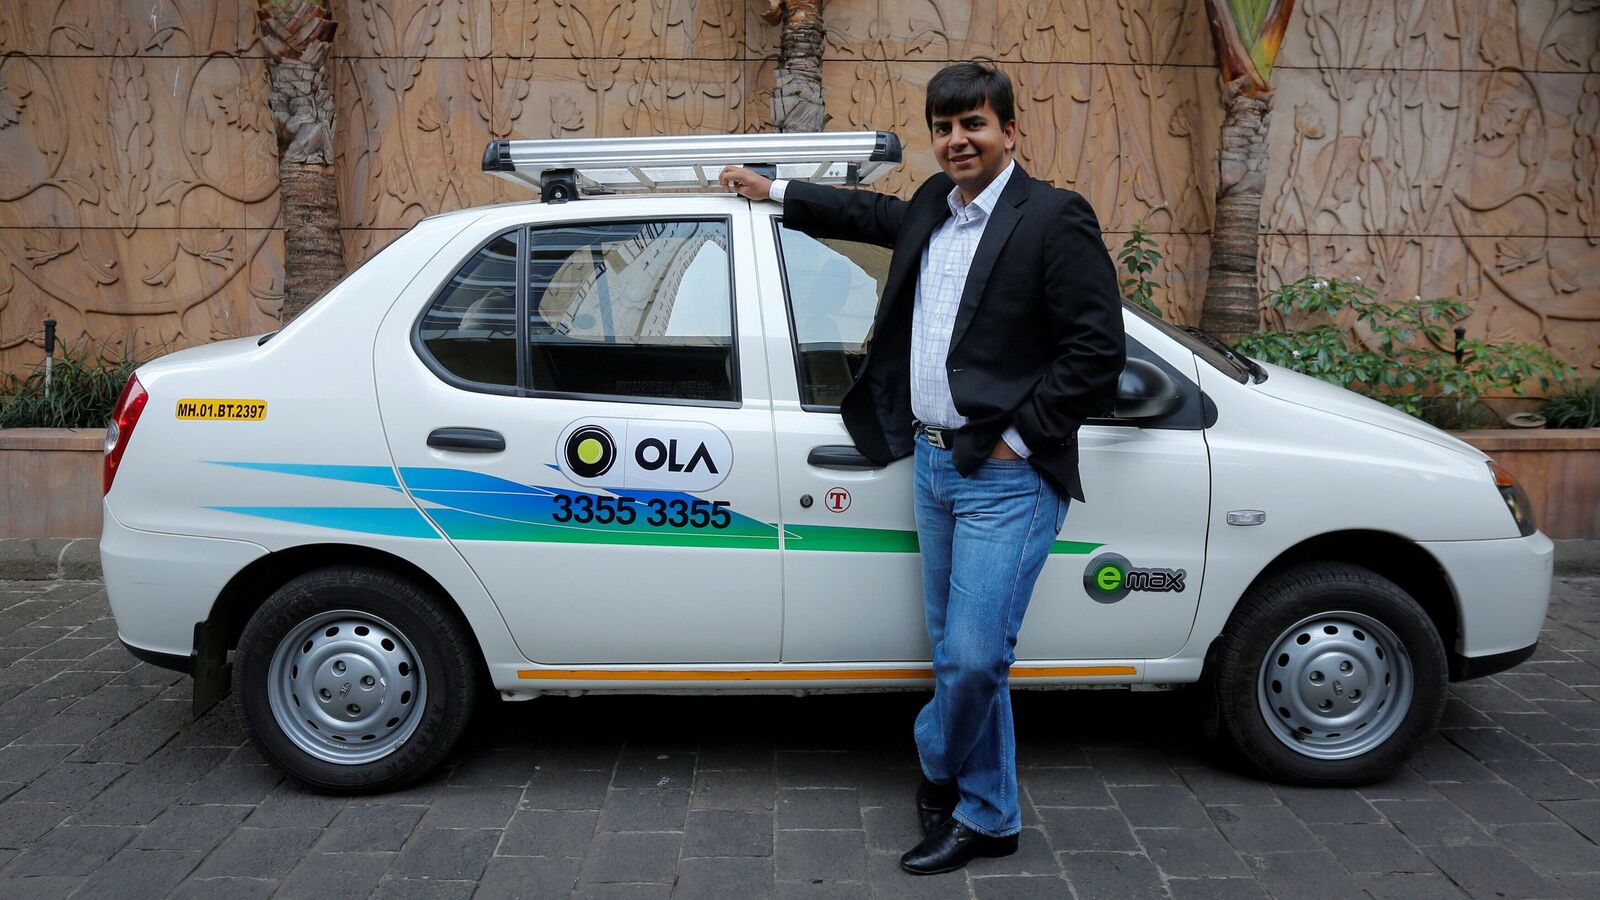 Ola cab users can make payments through app